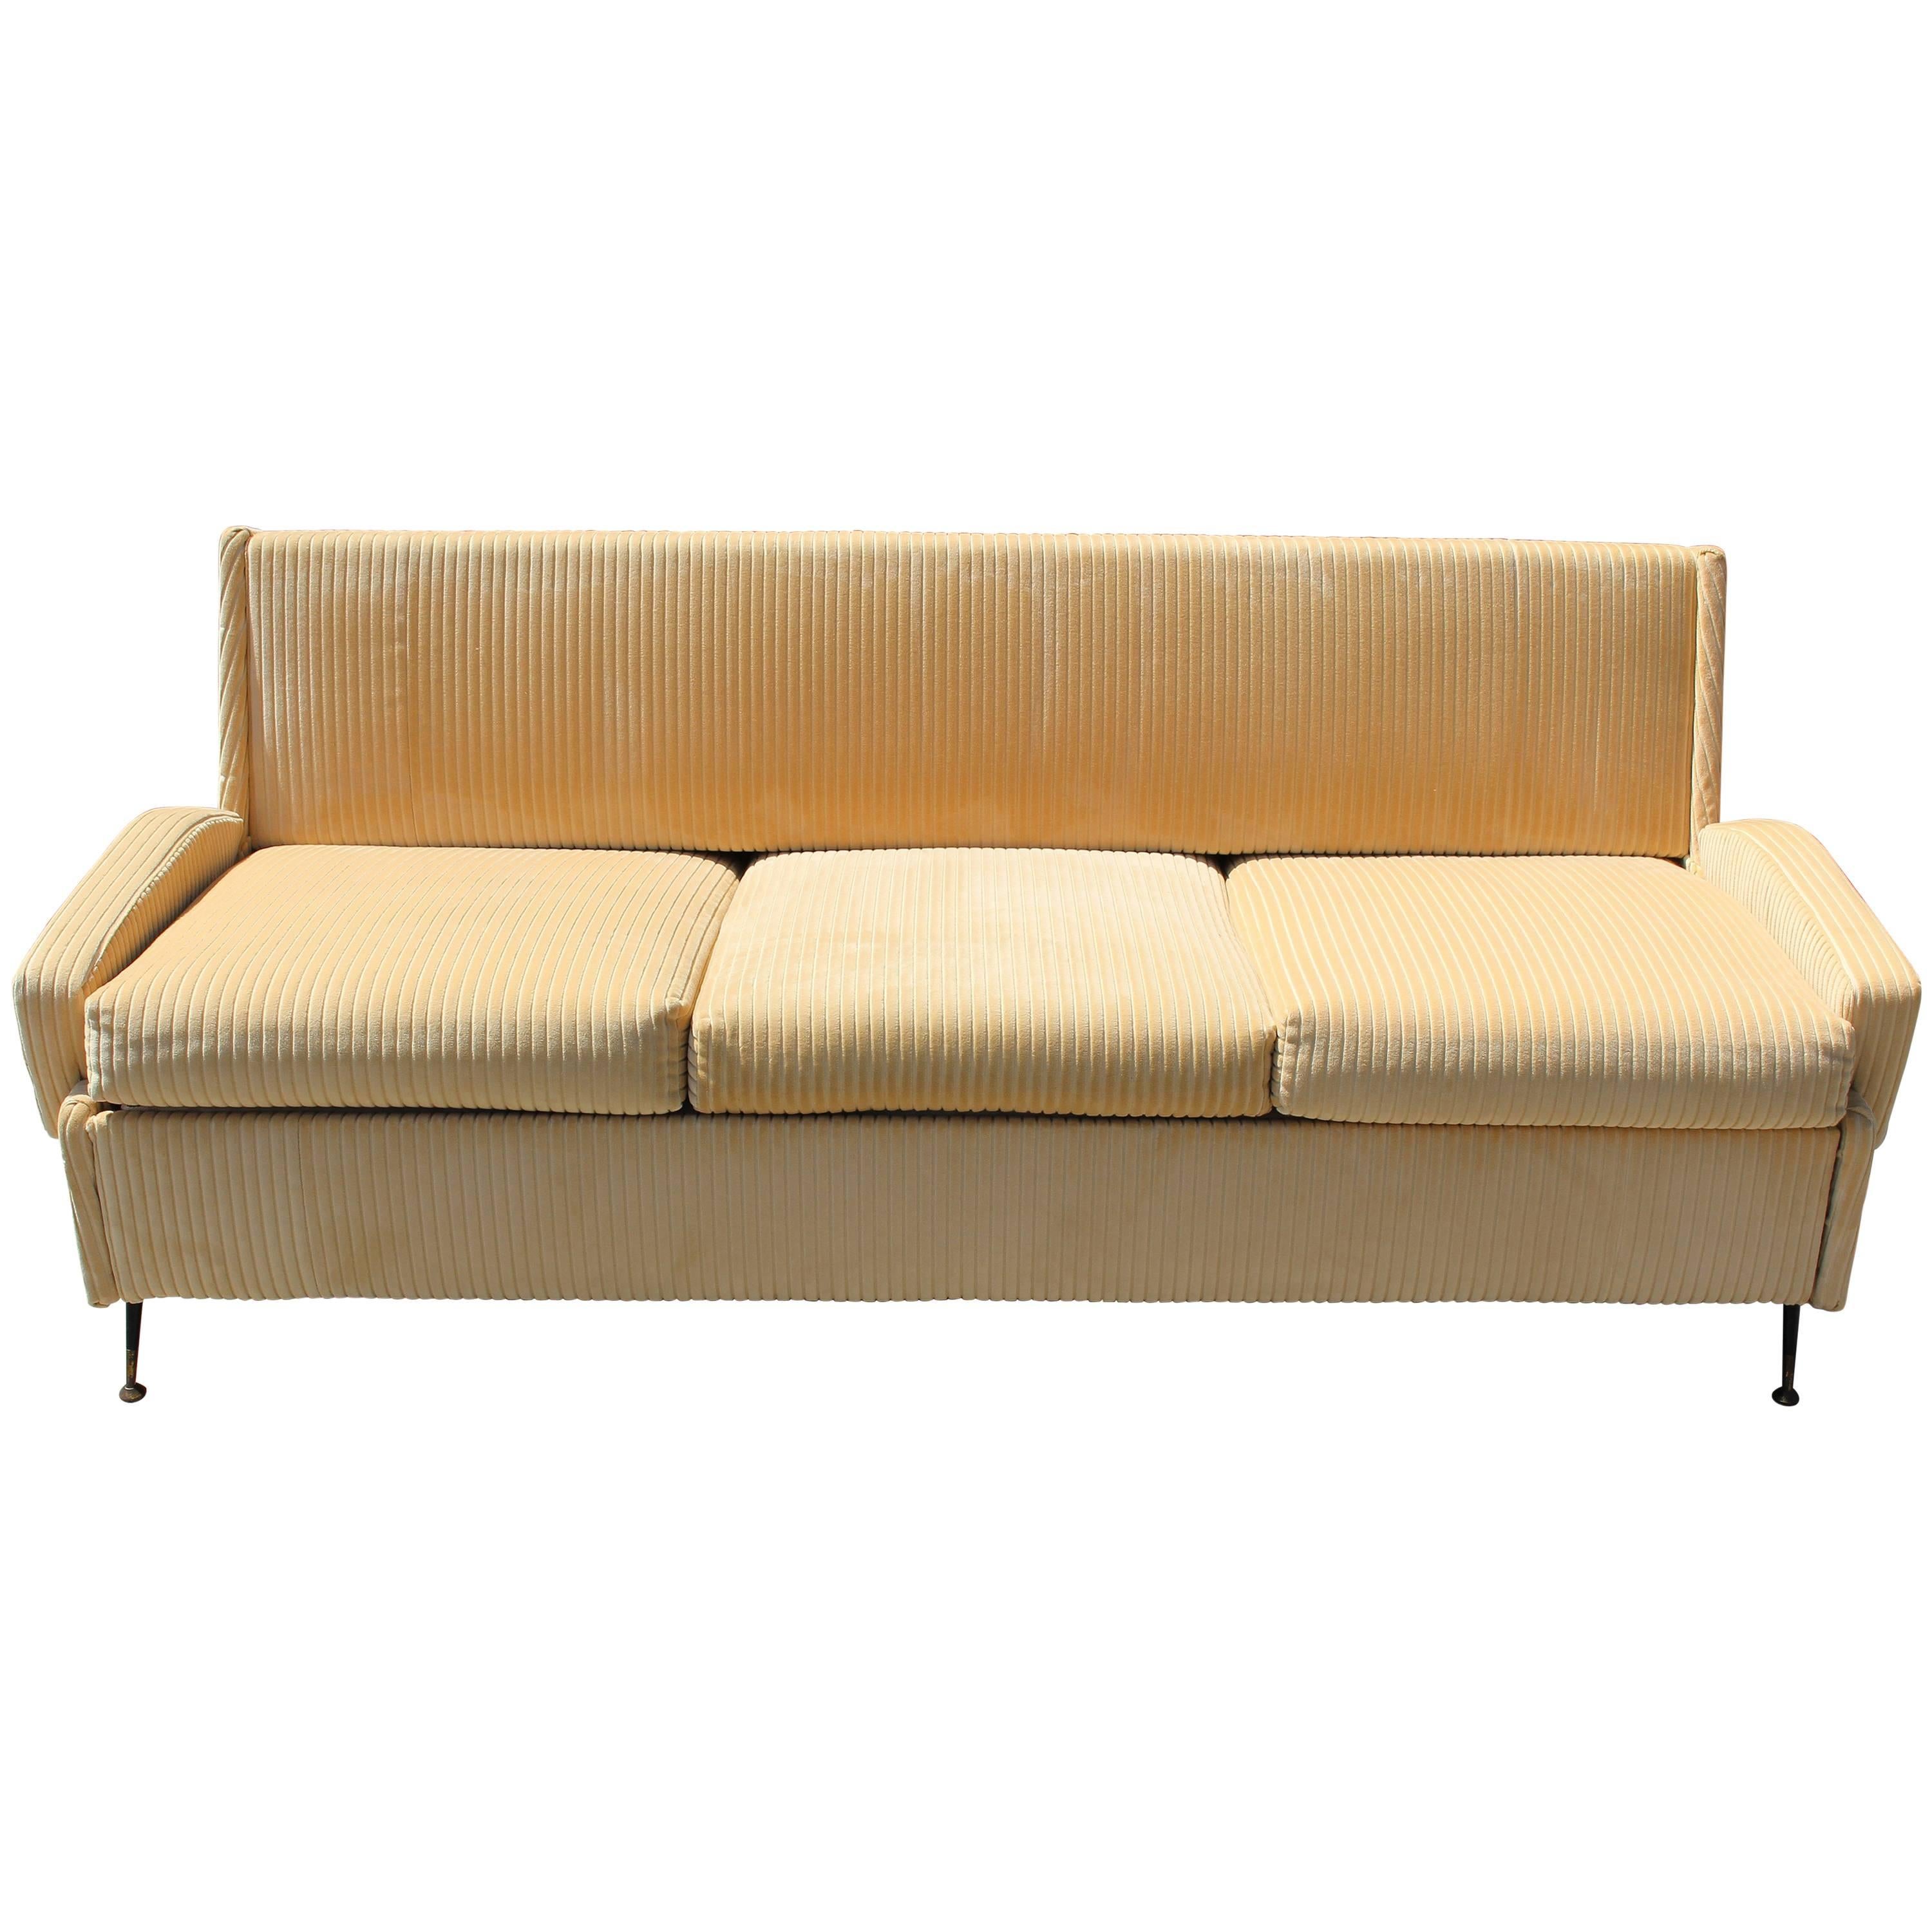 Italian Sofa with Burlap Bed Mechanism For Sale